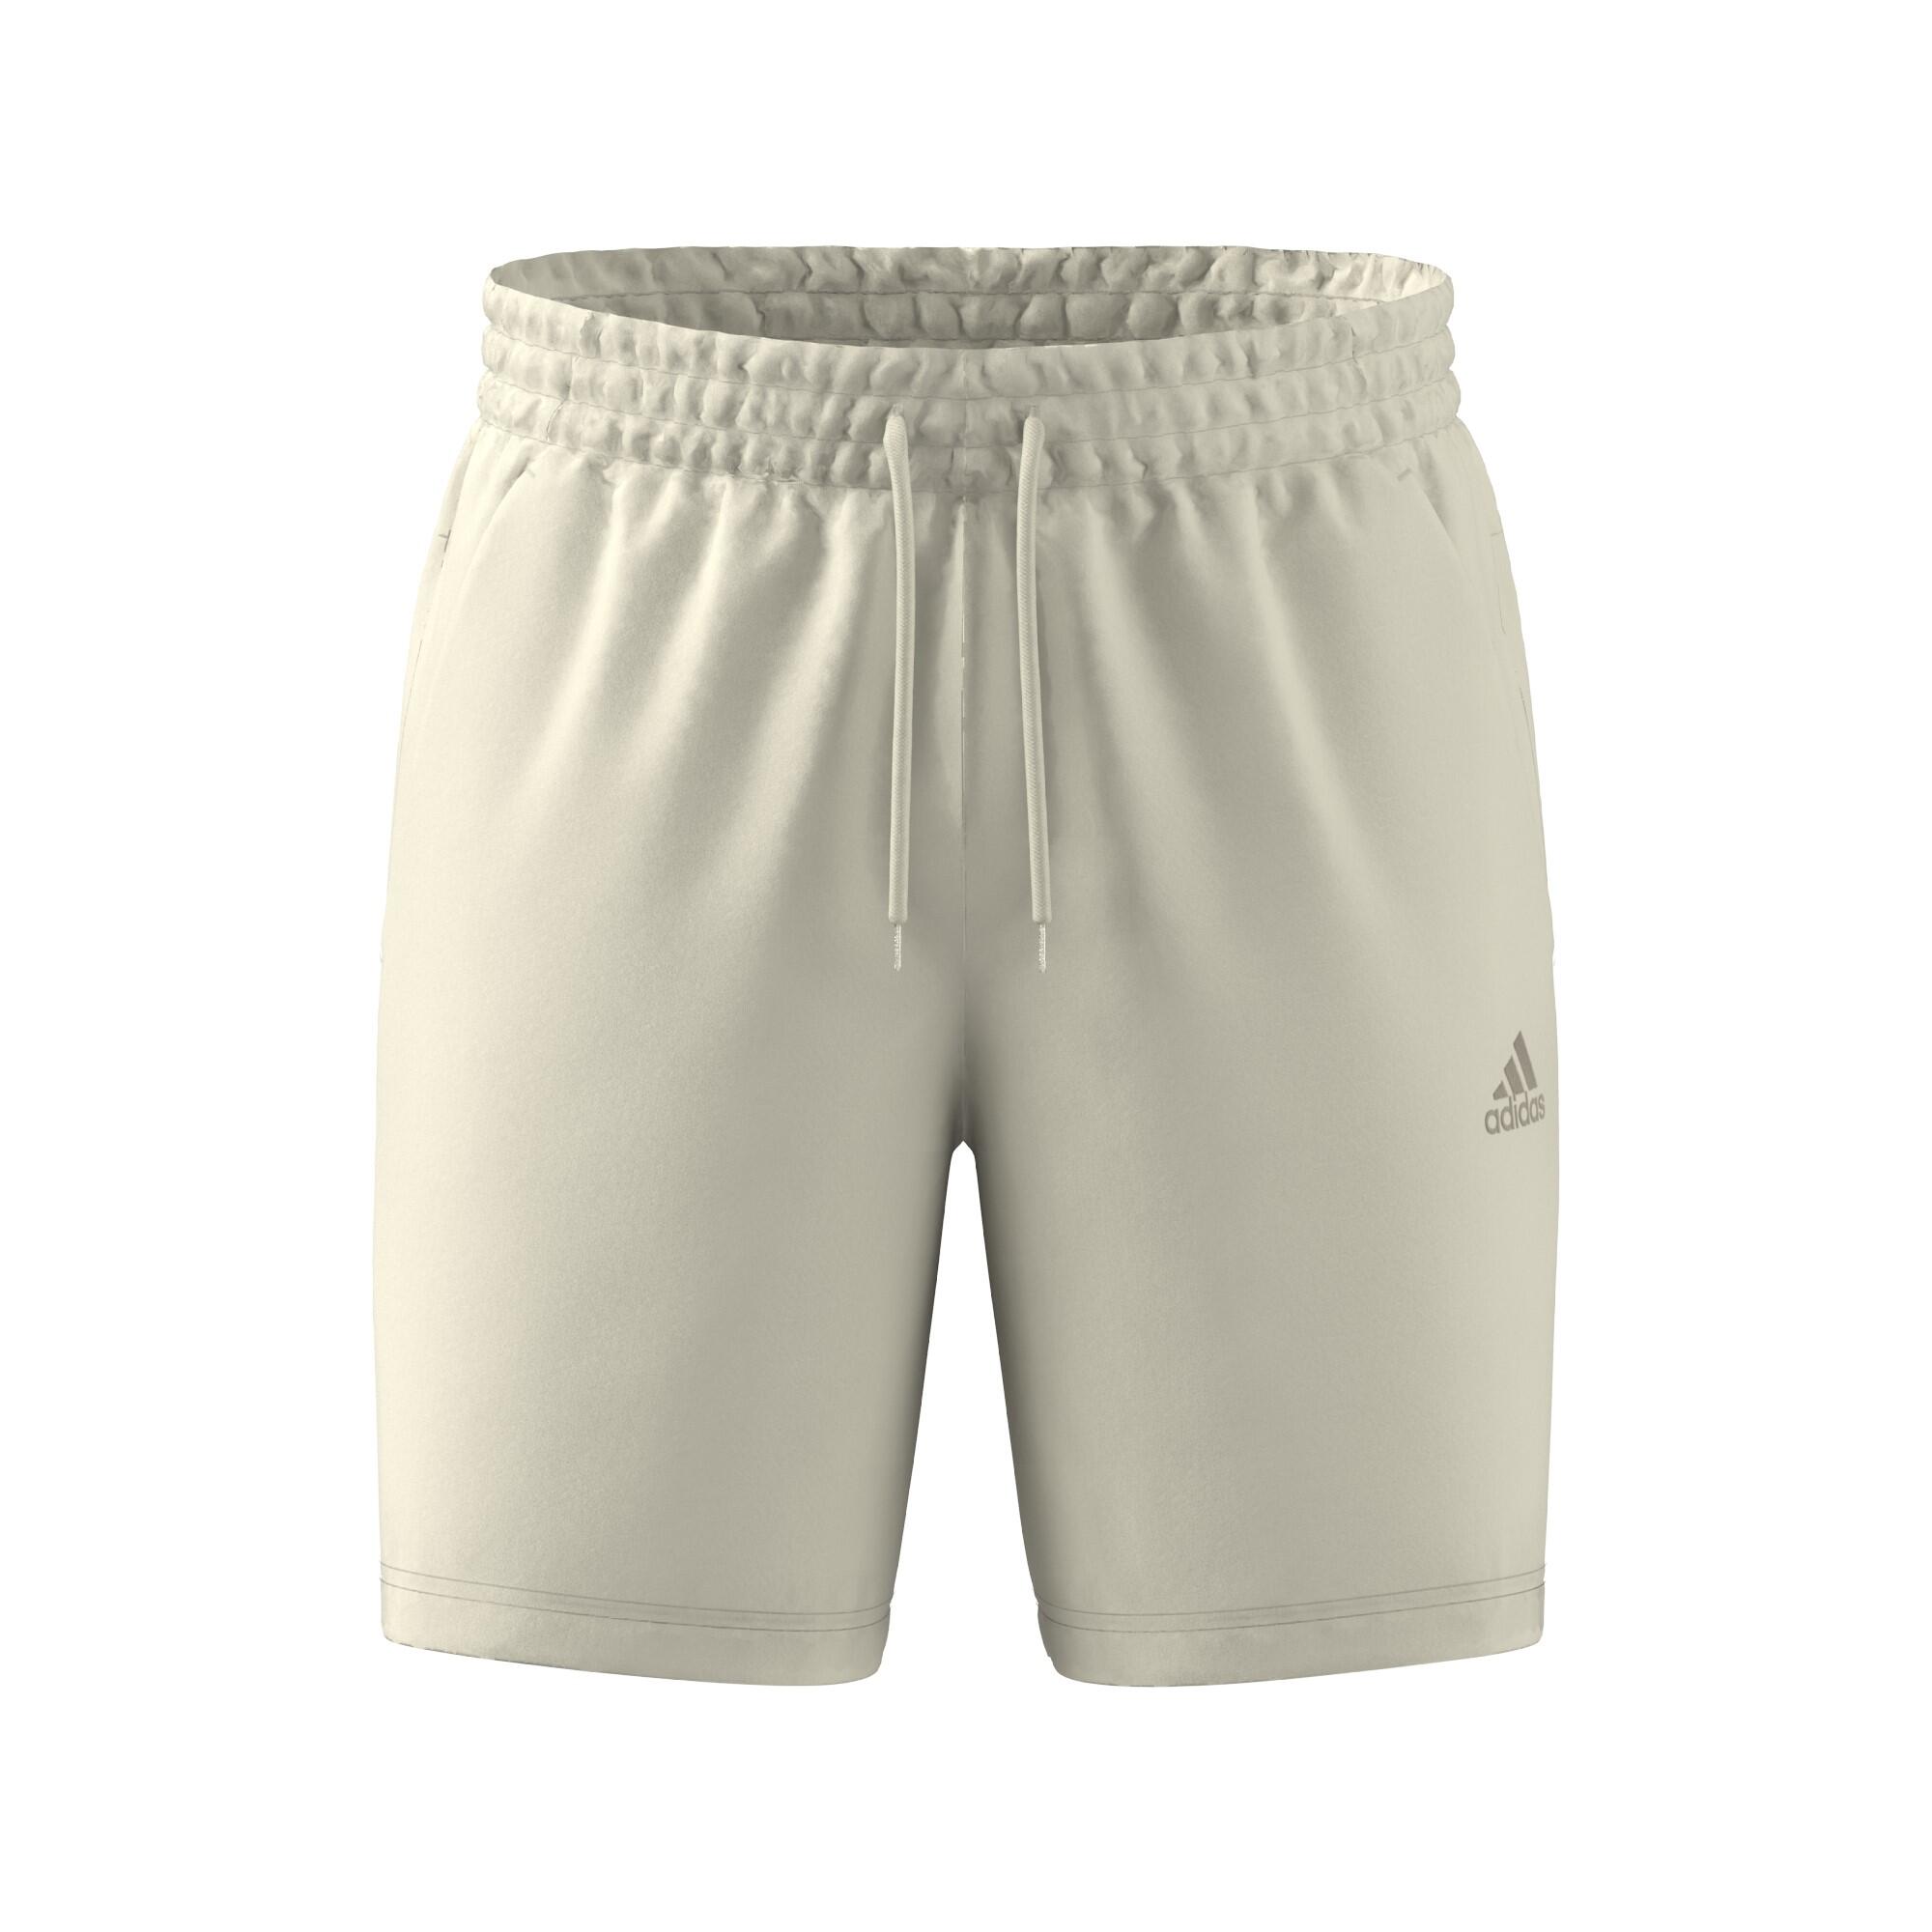 ADIDAS Men's Low-Impact Fitness Shorts - Off-White